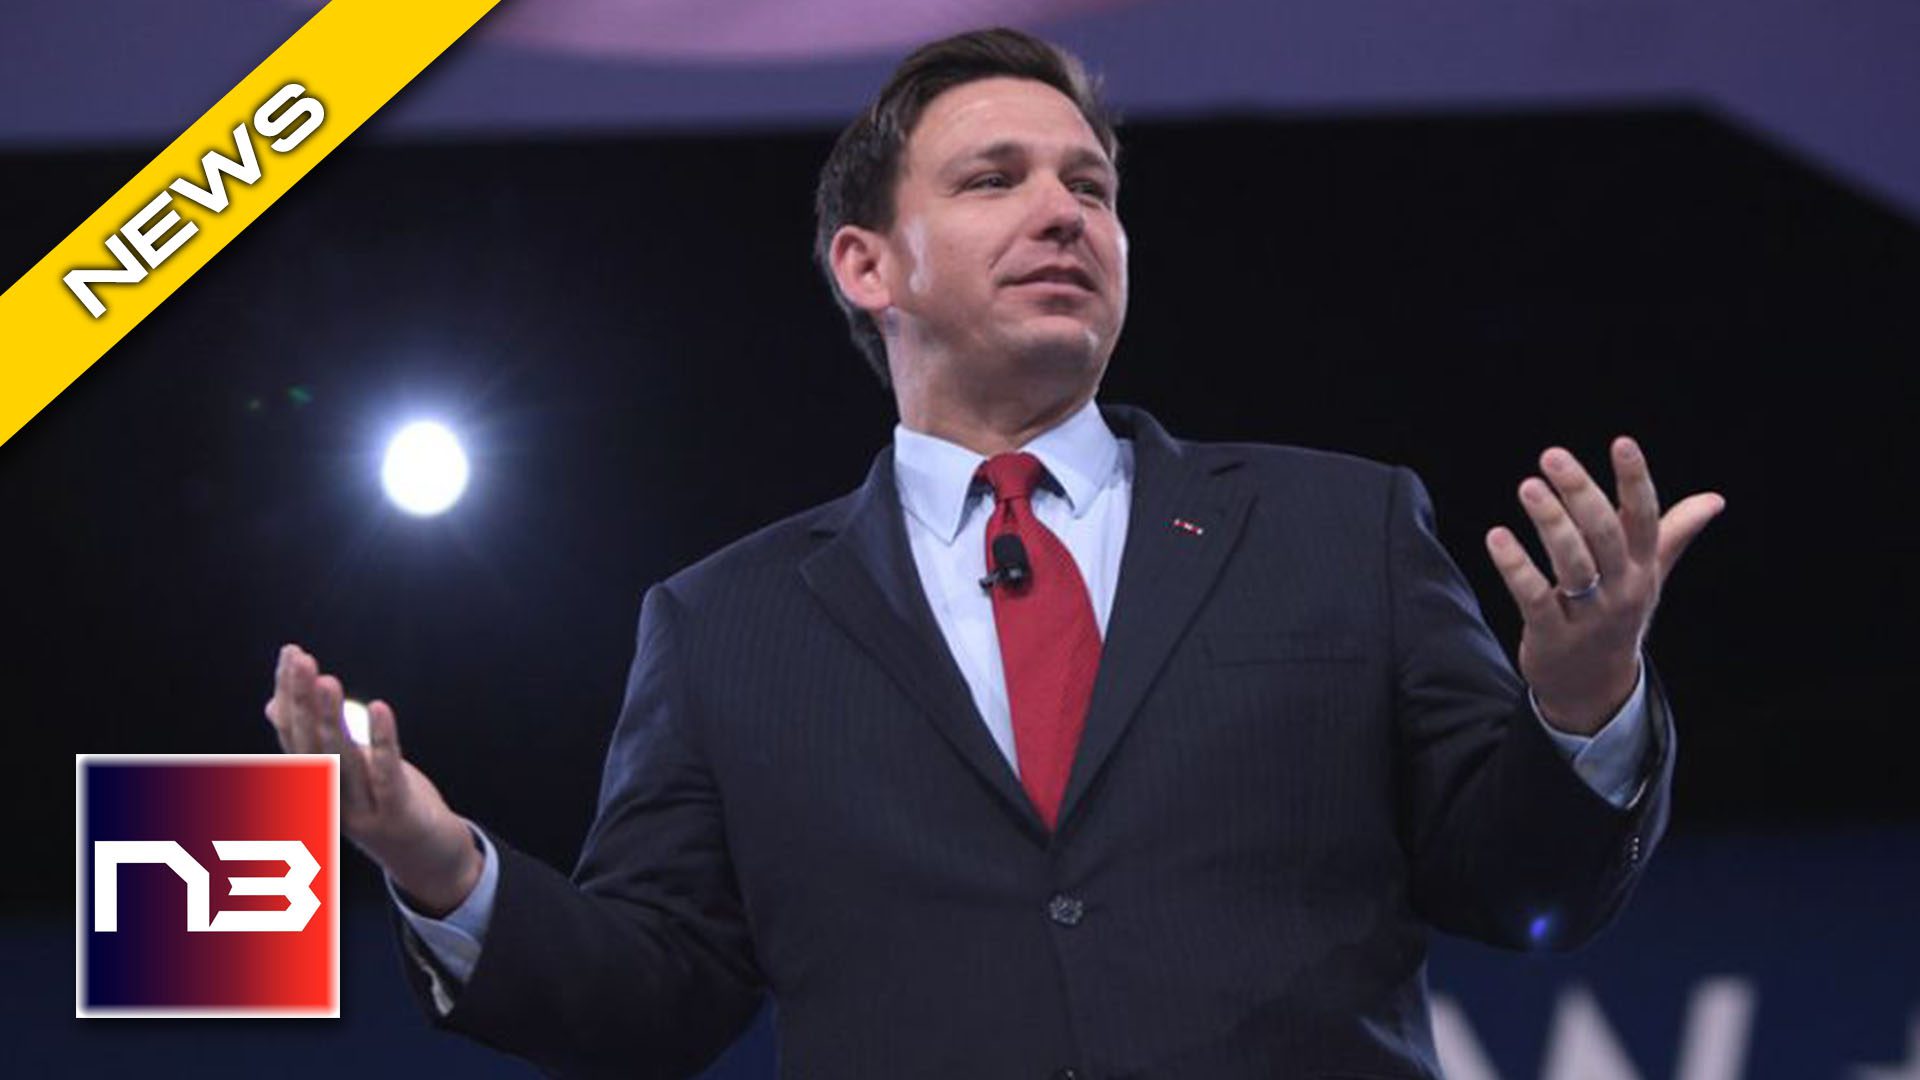 MUST WATCH: DESANTIS' PLAYBOOK FOR FREEDOM IS HERE